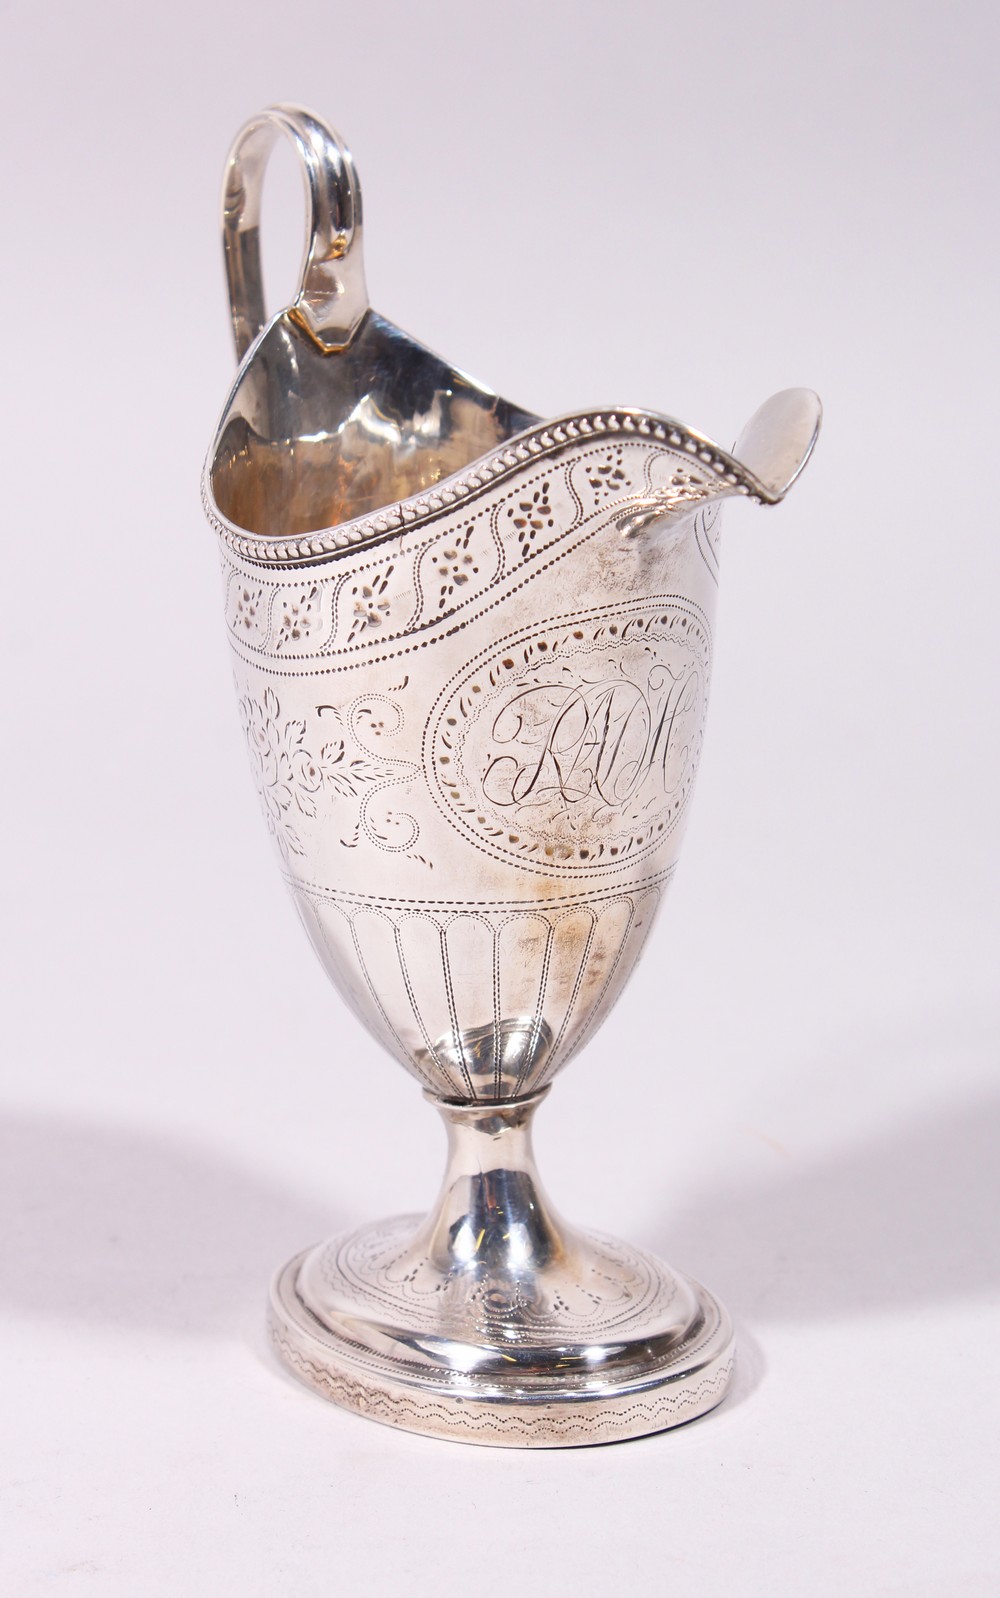 A GOOD GEORGE III ENGRAVED HELMET SHAPED MILK JUG, with reeded handle and base. London 1782.